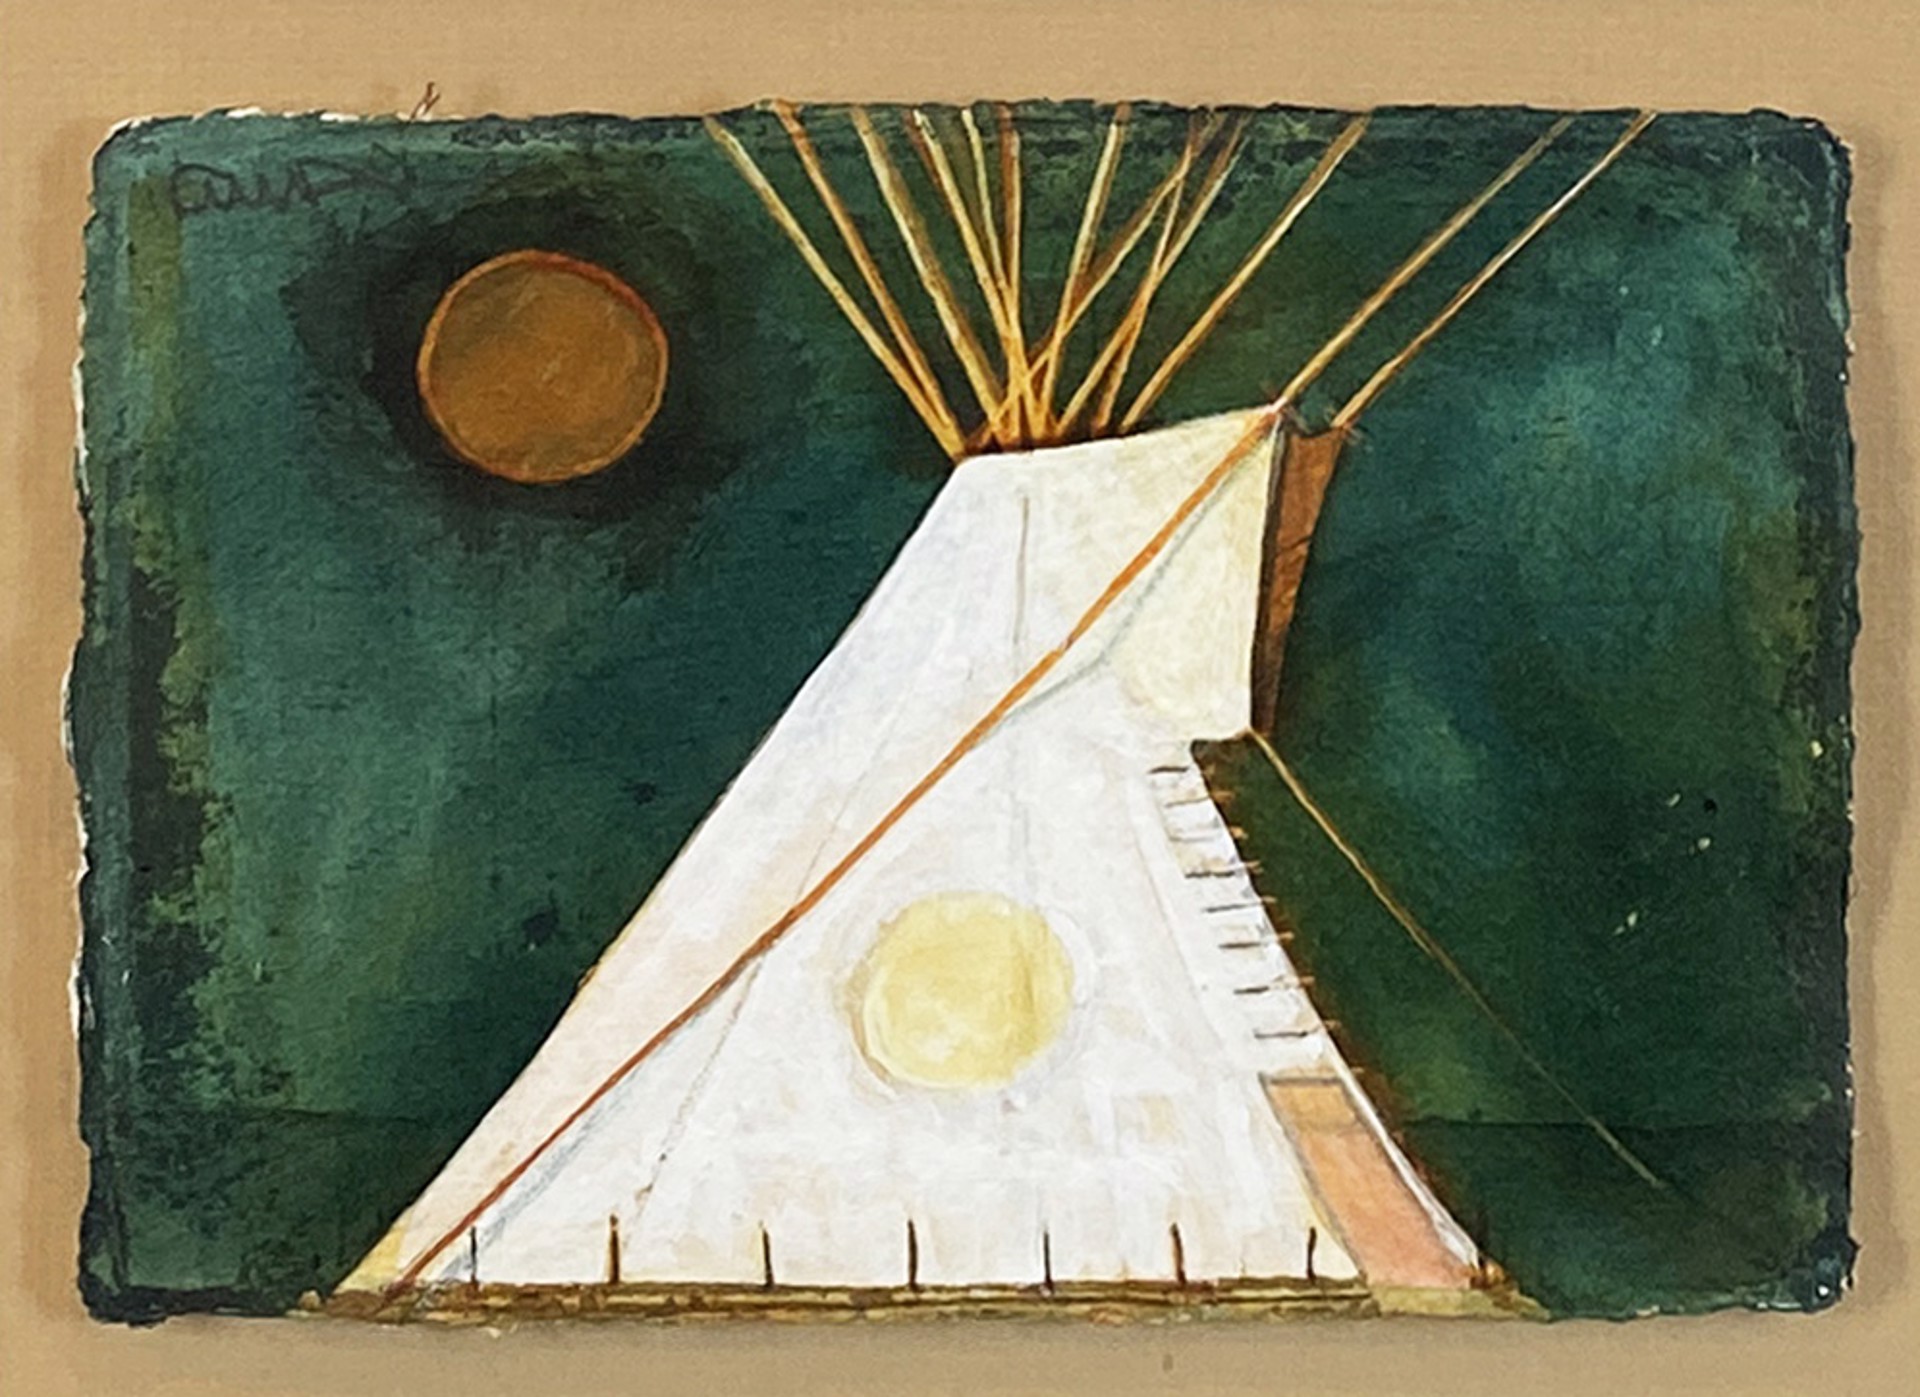 Moonlit Teepee No.2 by Kevin Red Star